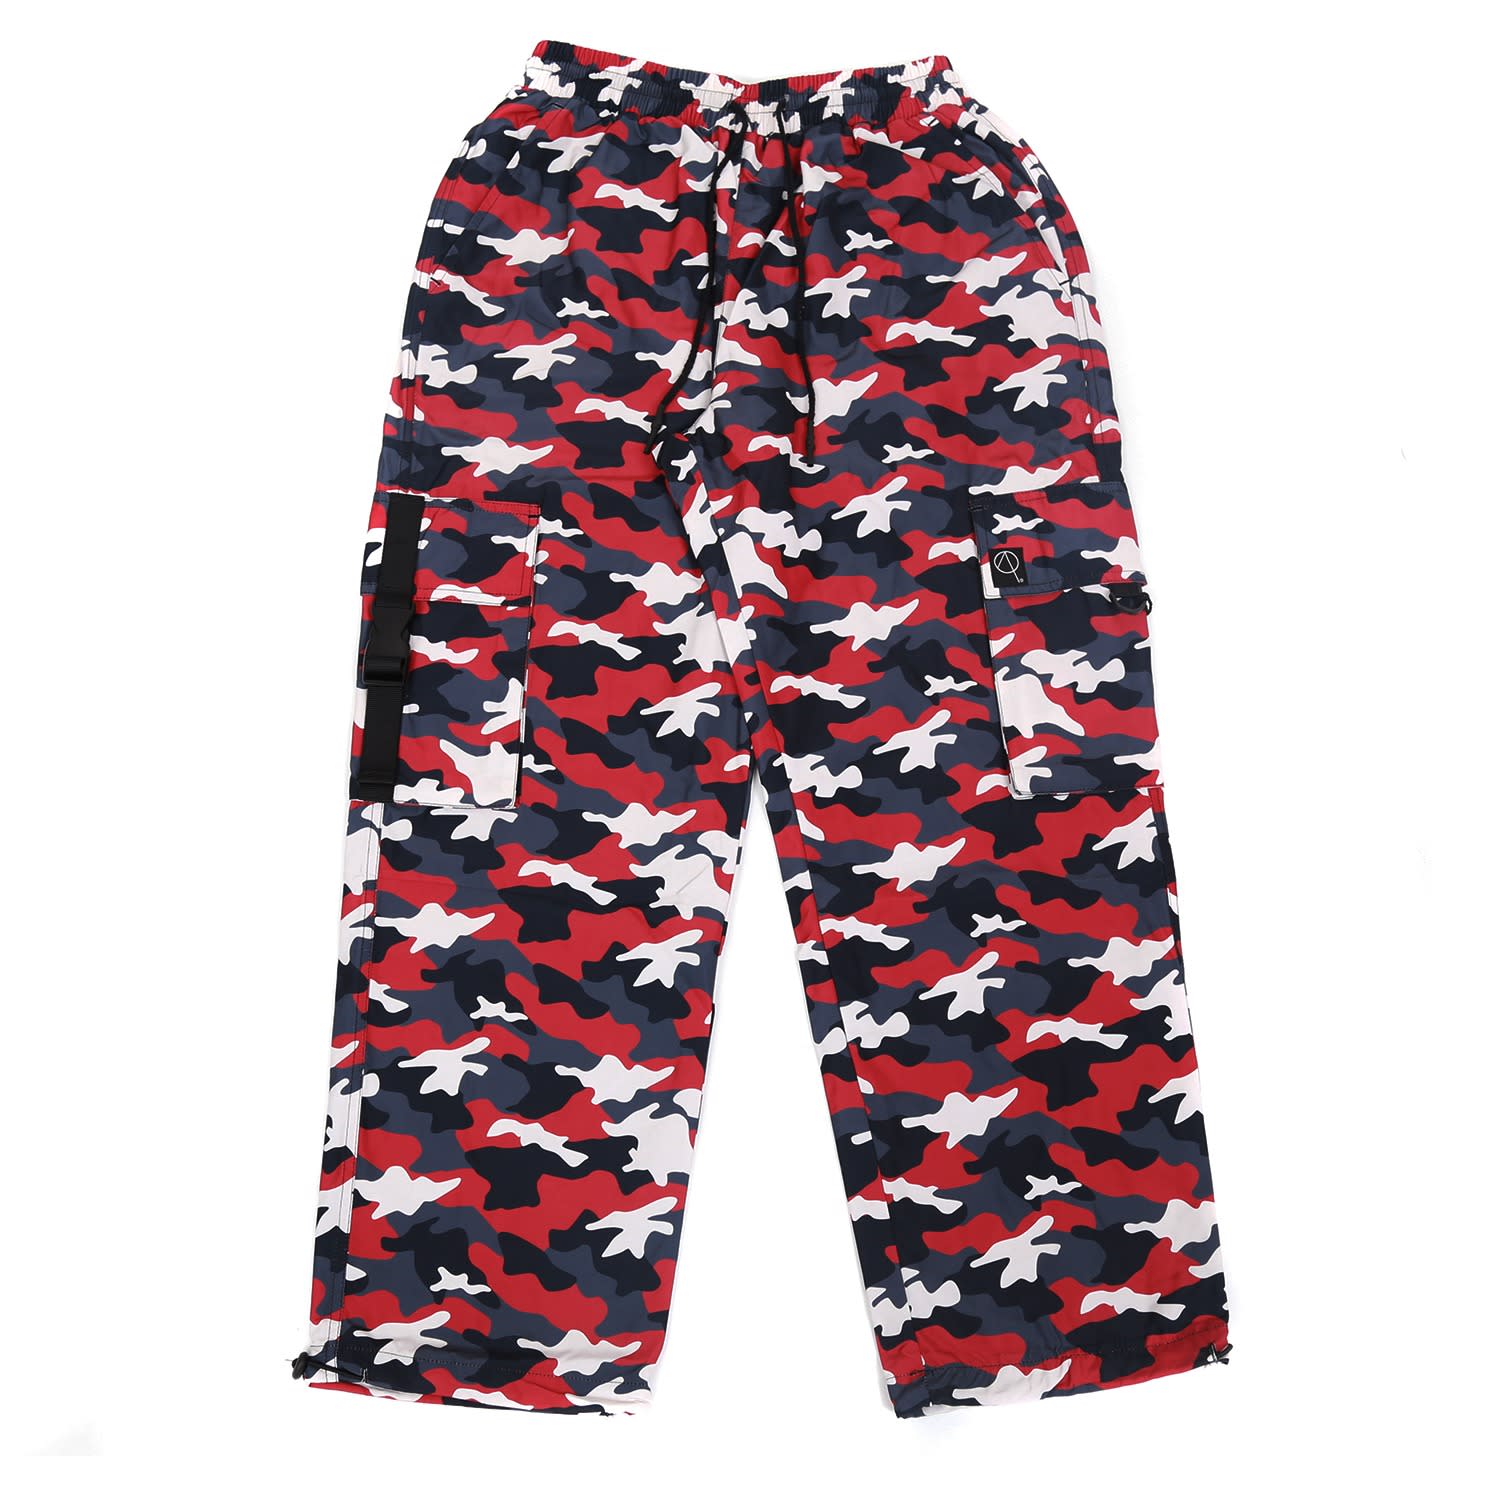 camo pants red and black